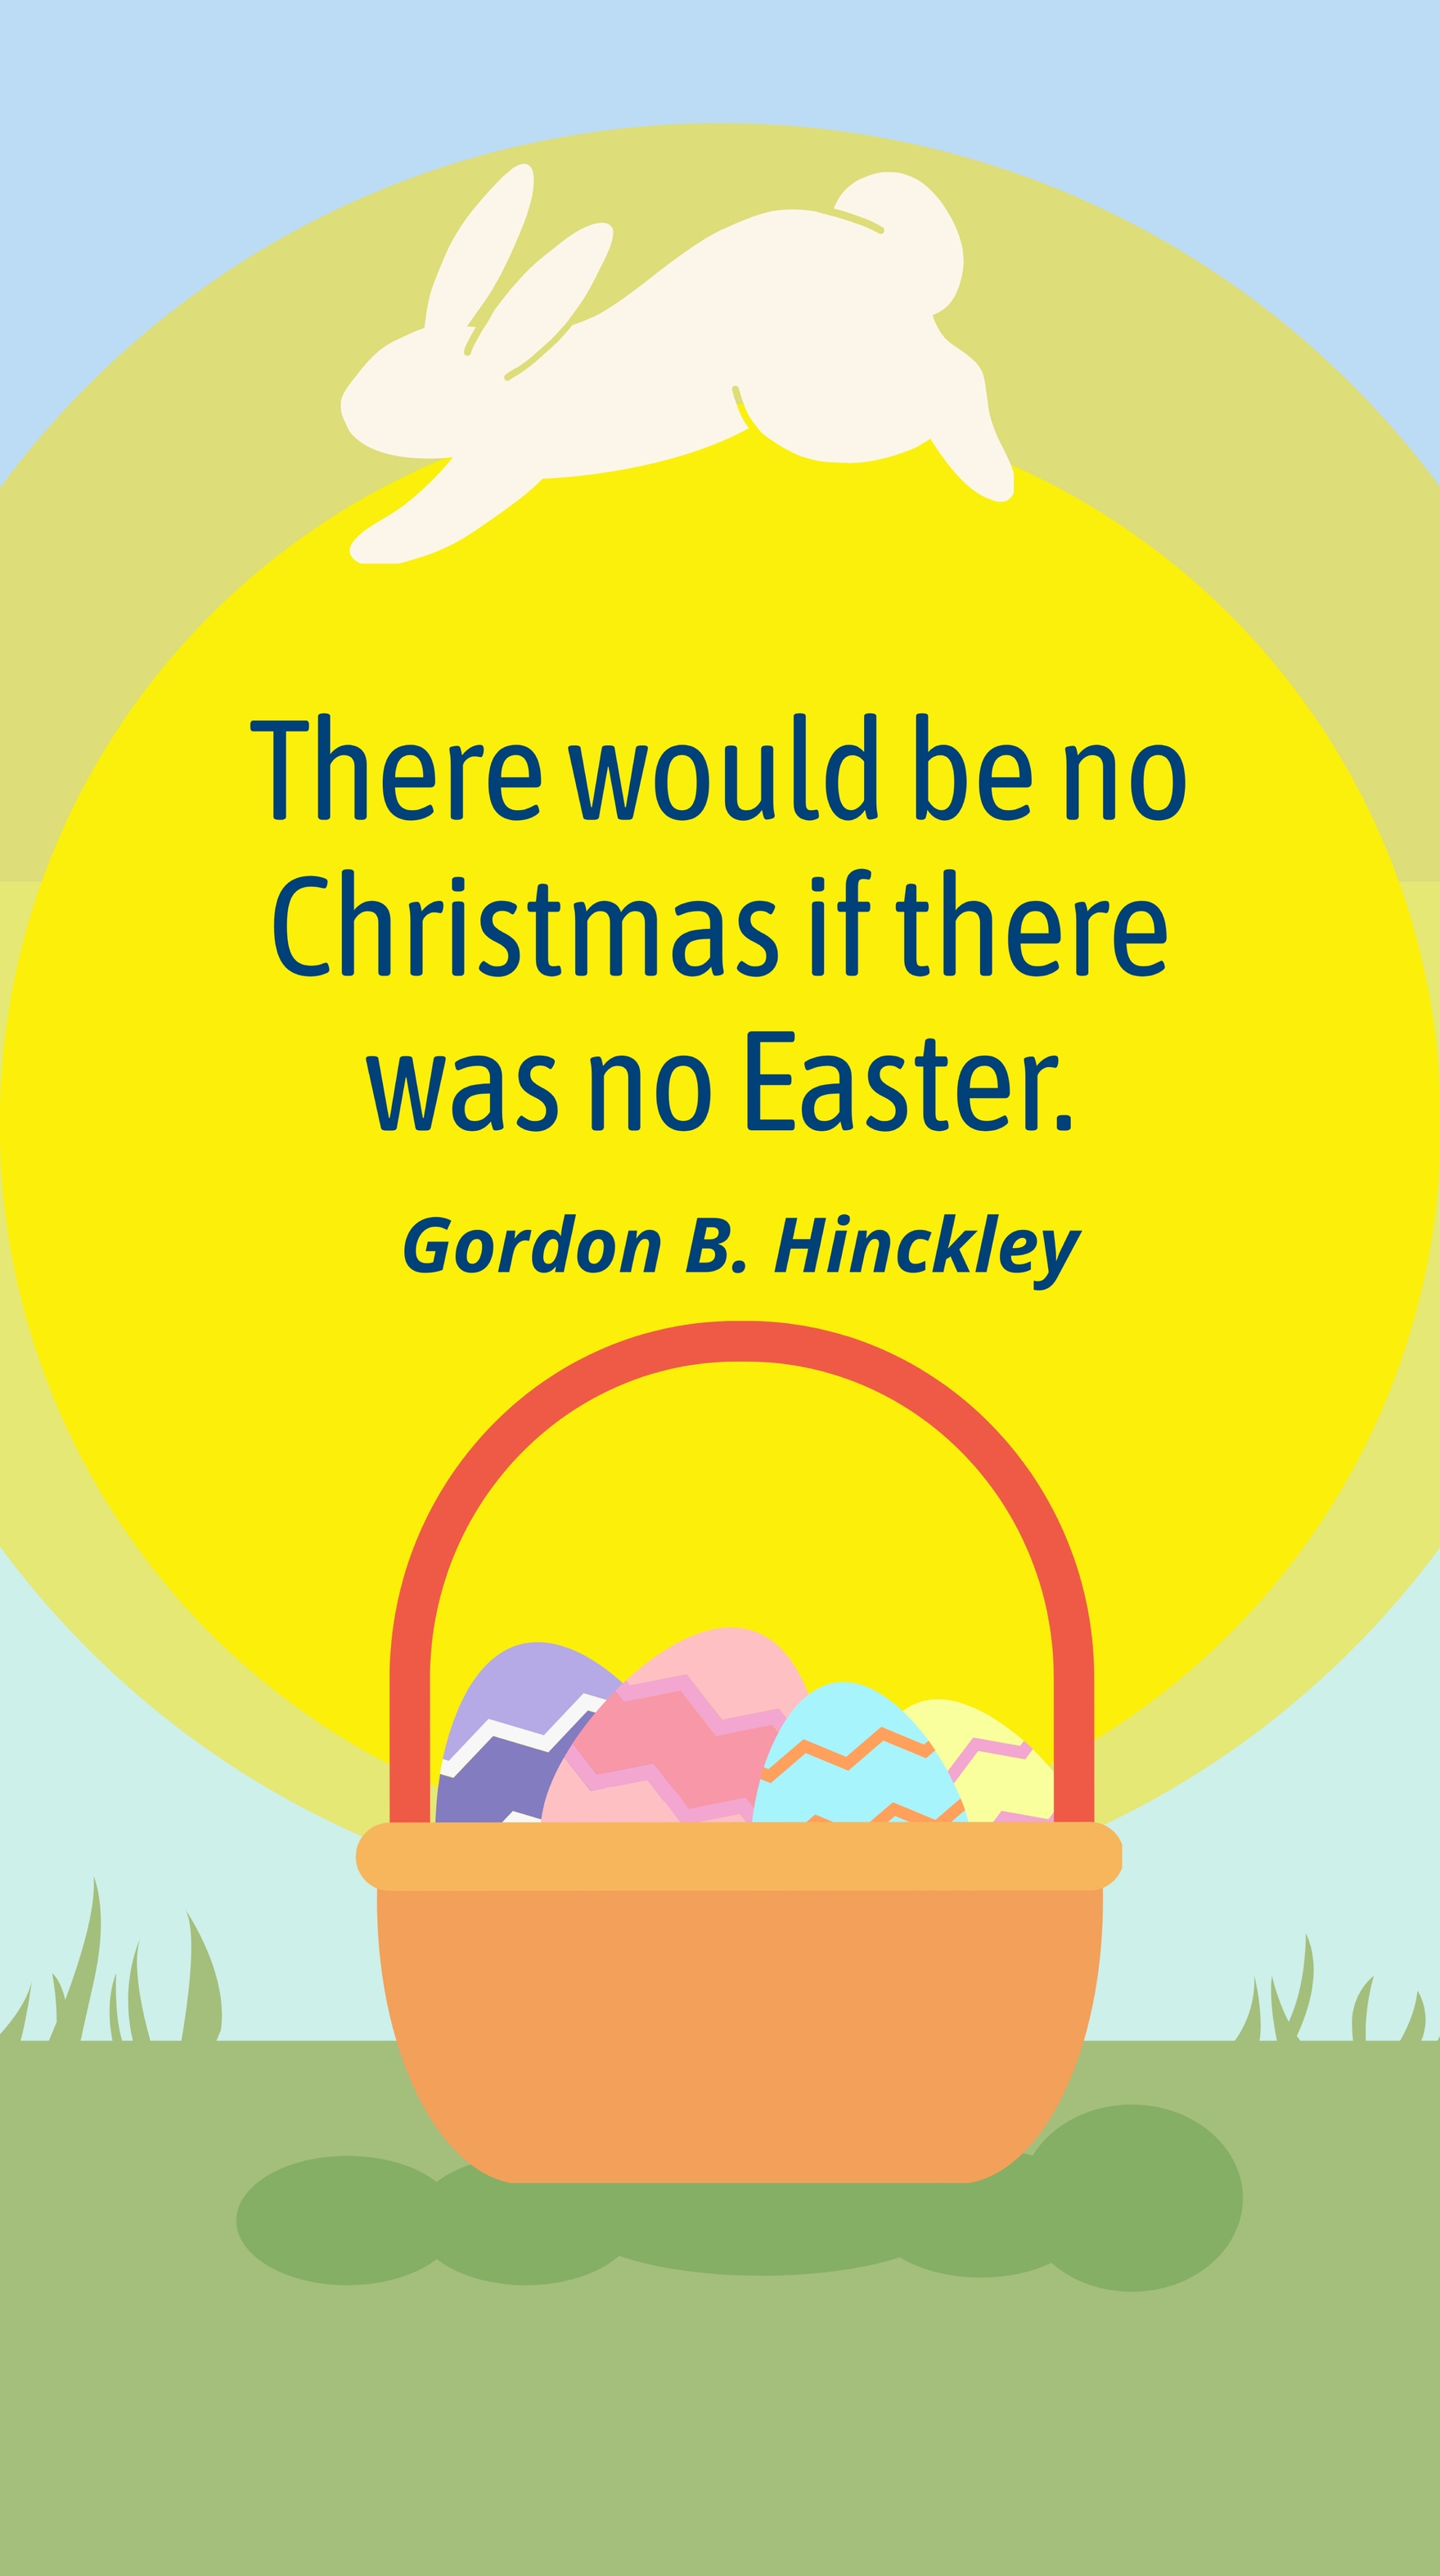 Gordon B. Hinckley - There would be no Christmas if there was no Easter.